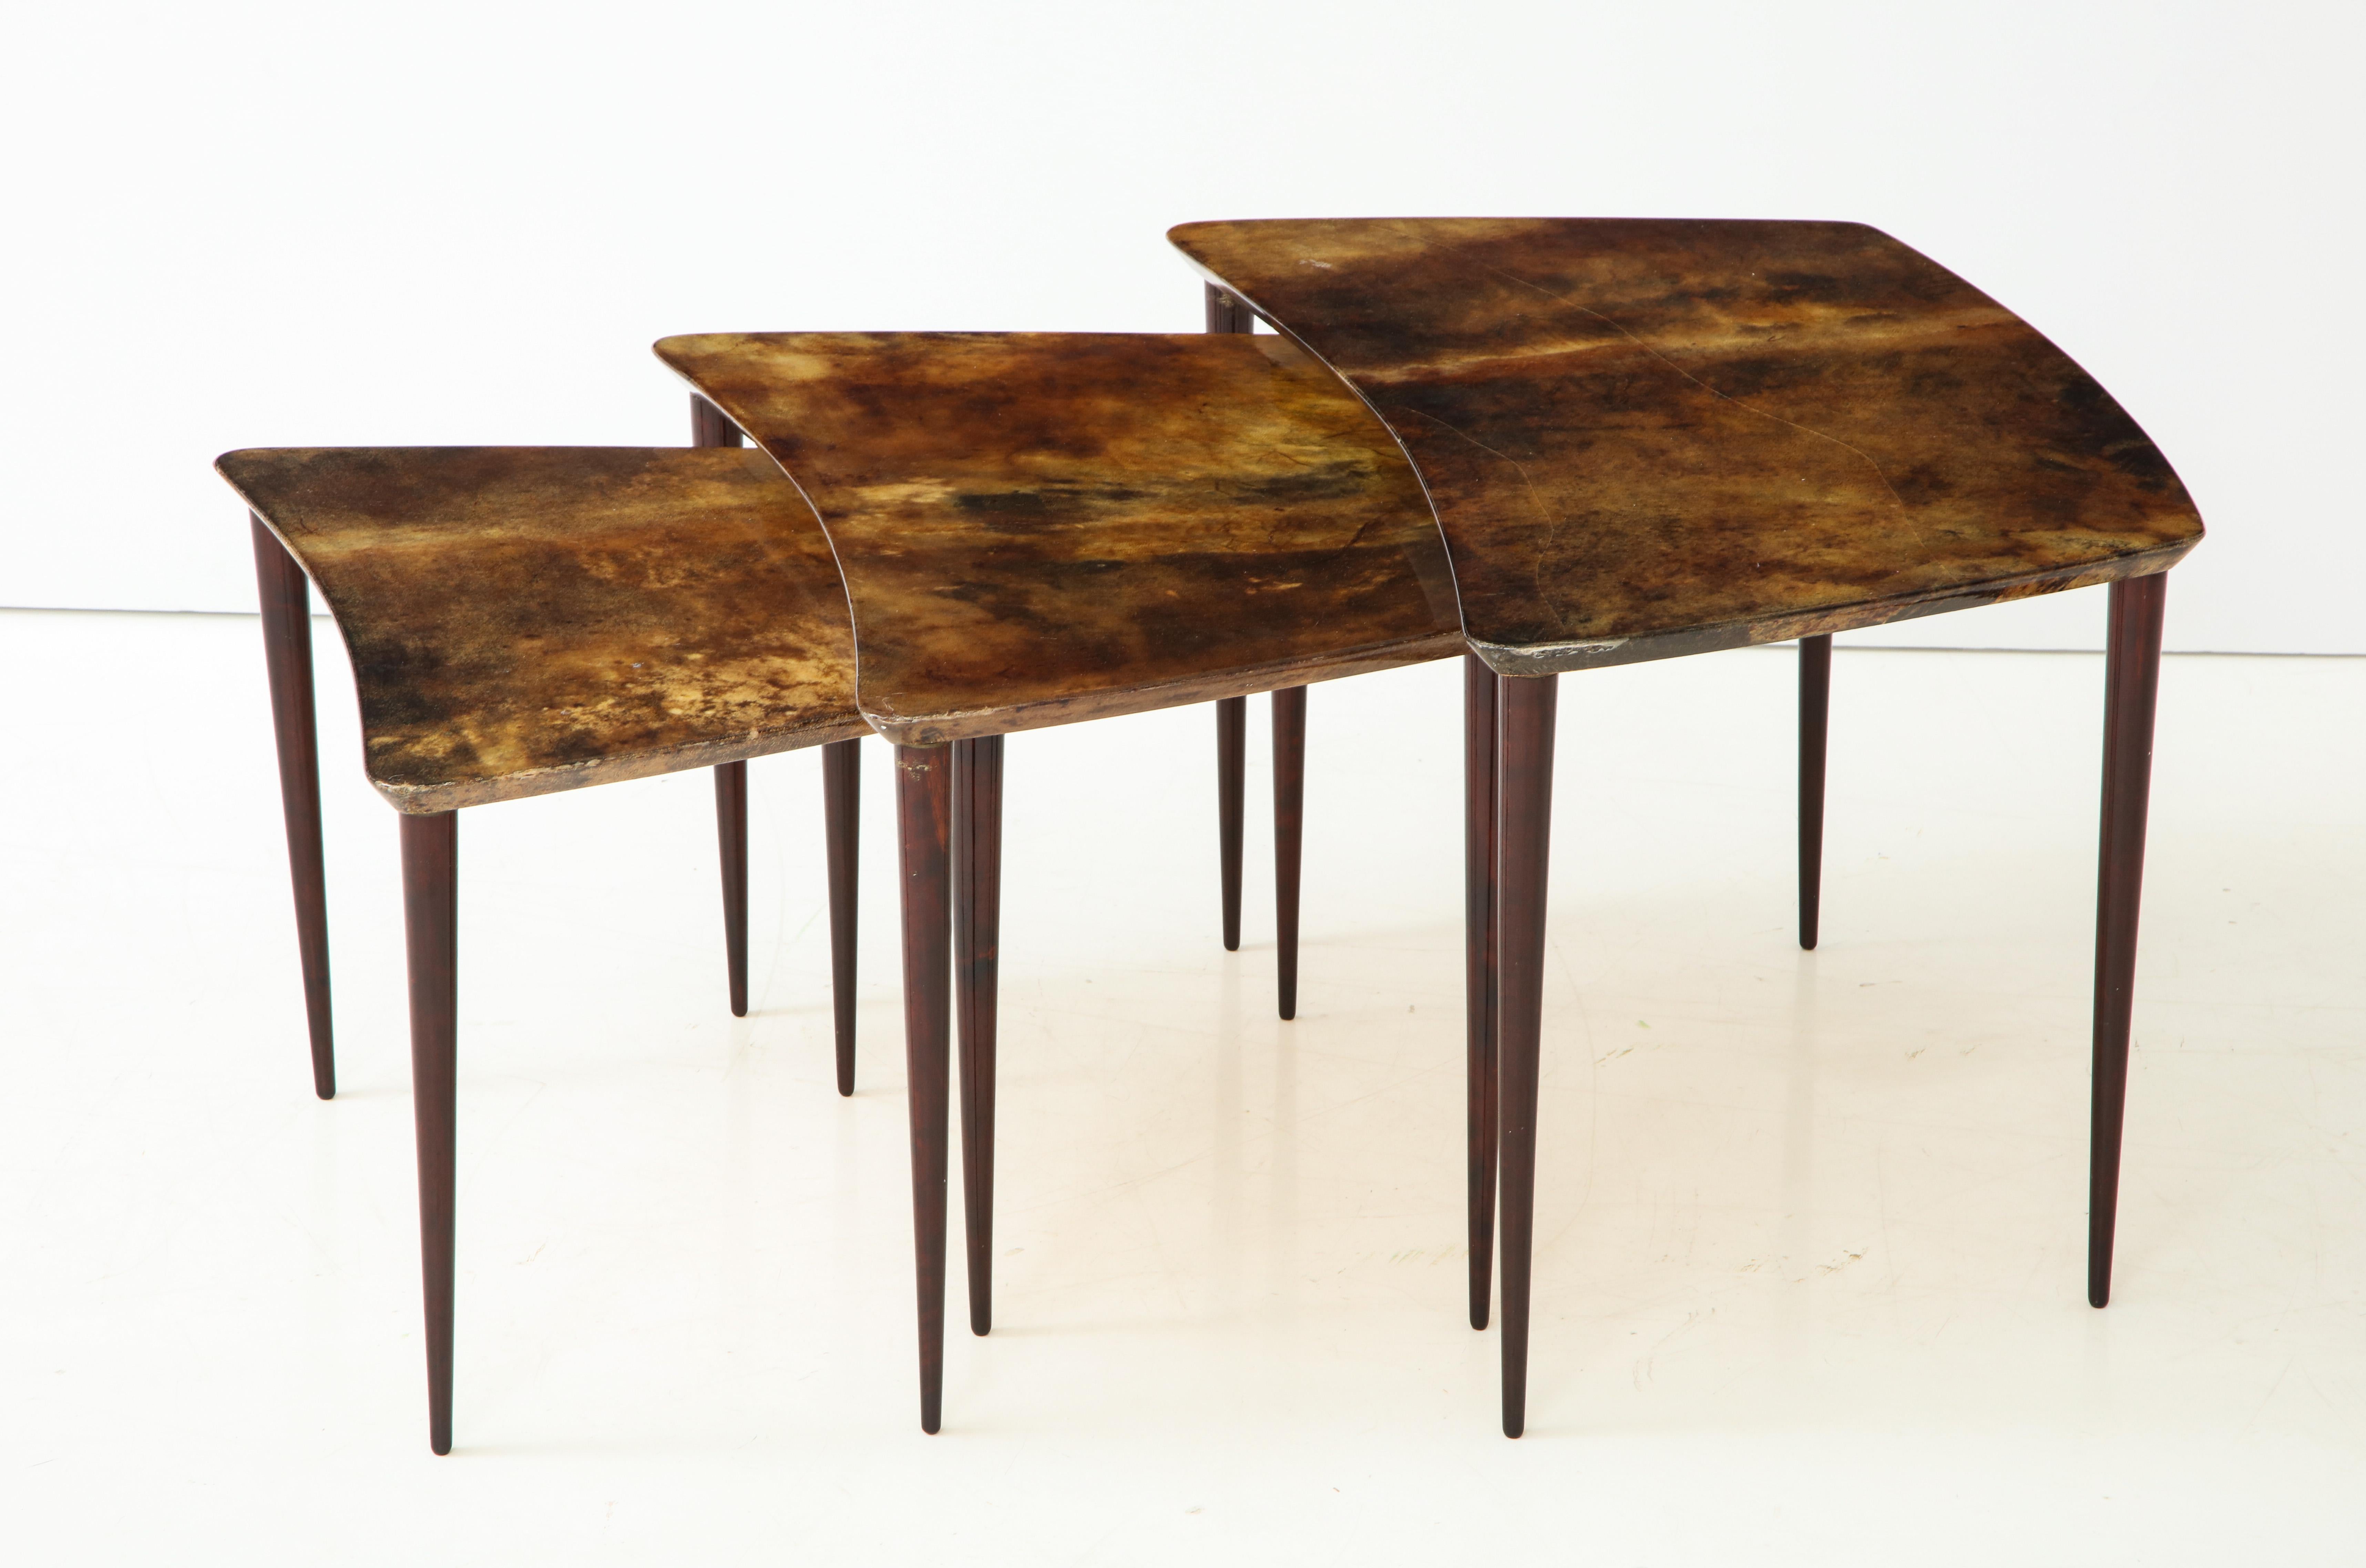 Trio of Italian goatskin or parchment nesting tables, designed by Aldo Tura, Italy, circa 1950s. The large table measures 16.25